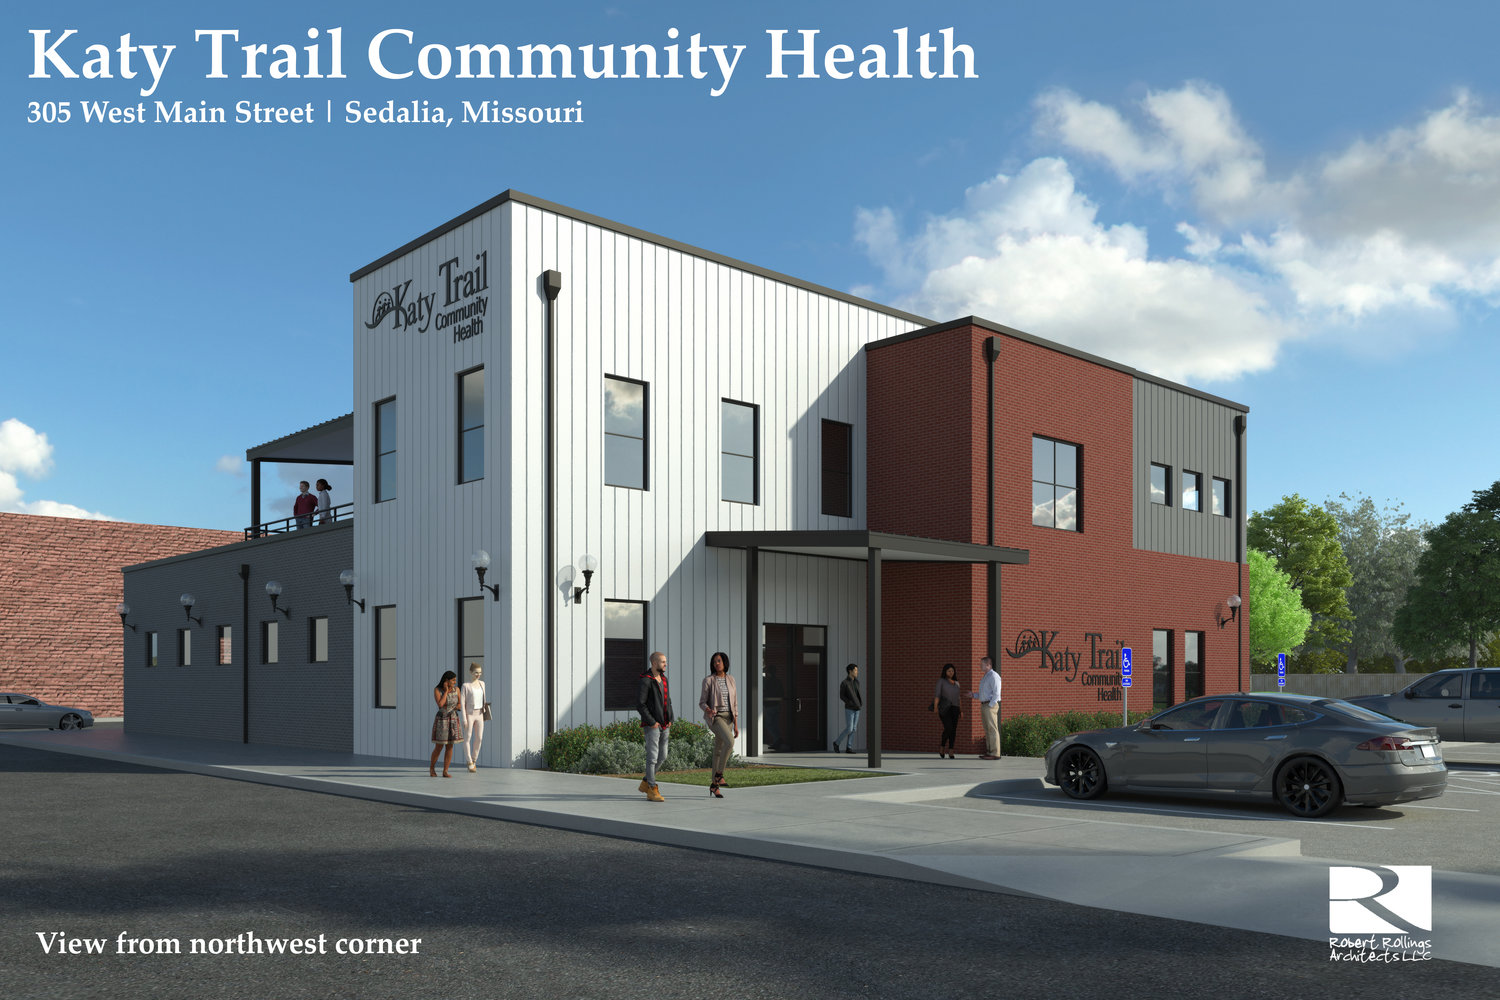 An architect’s rendering shows the second Sedalia site for Katy Trail Community Health at 305 W. Main St. from its northwest corner. The site is being constructed by Preferred Construction in conjunction with Rob Rollings Architects and is on track to be complete by late August or early September.